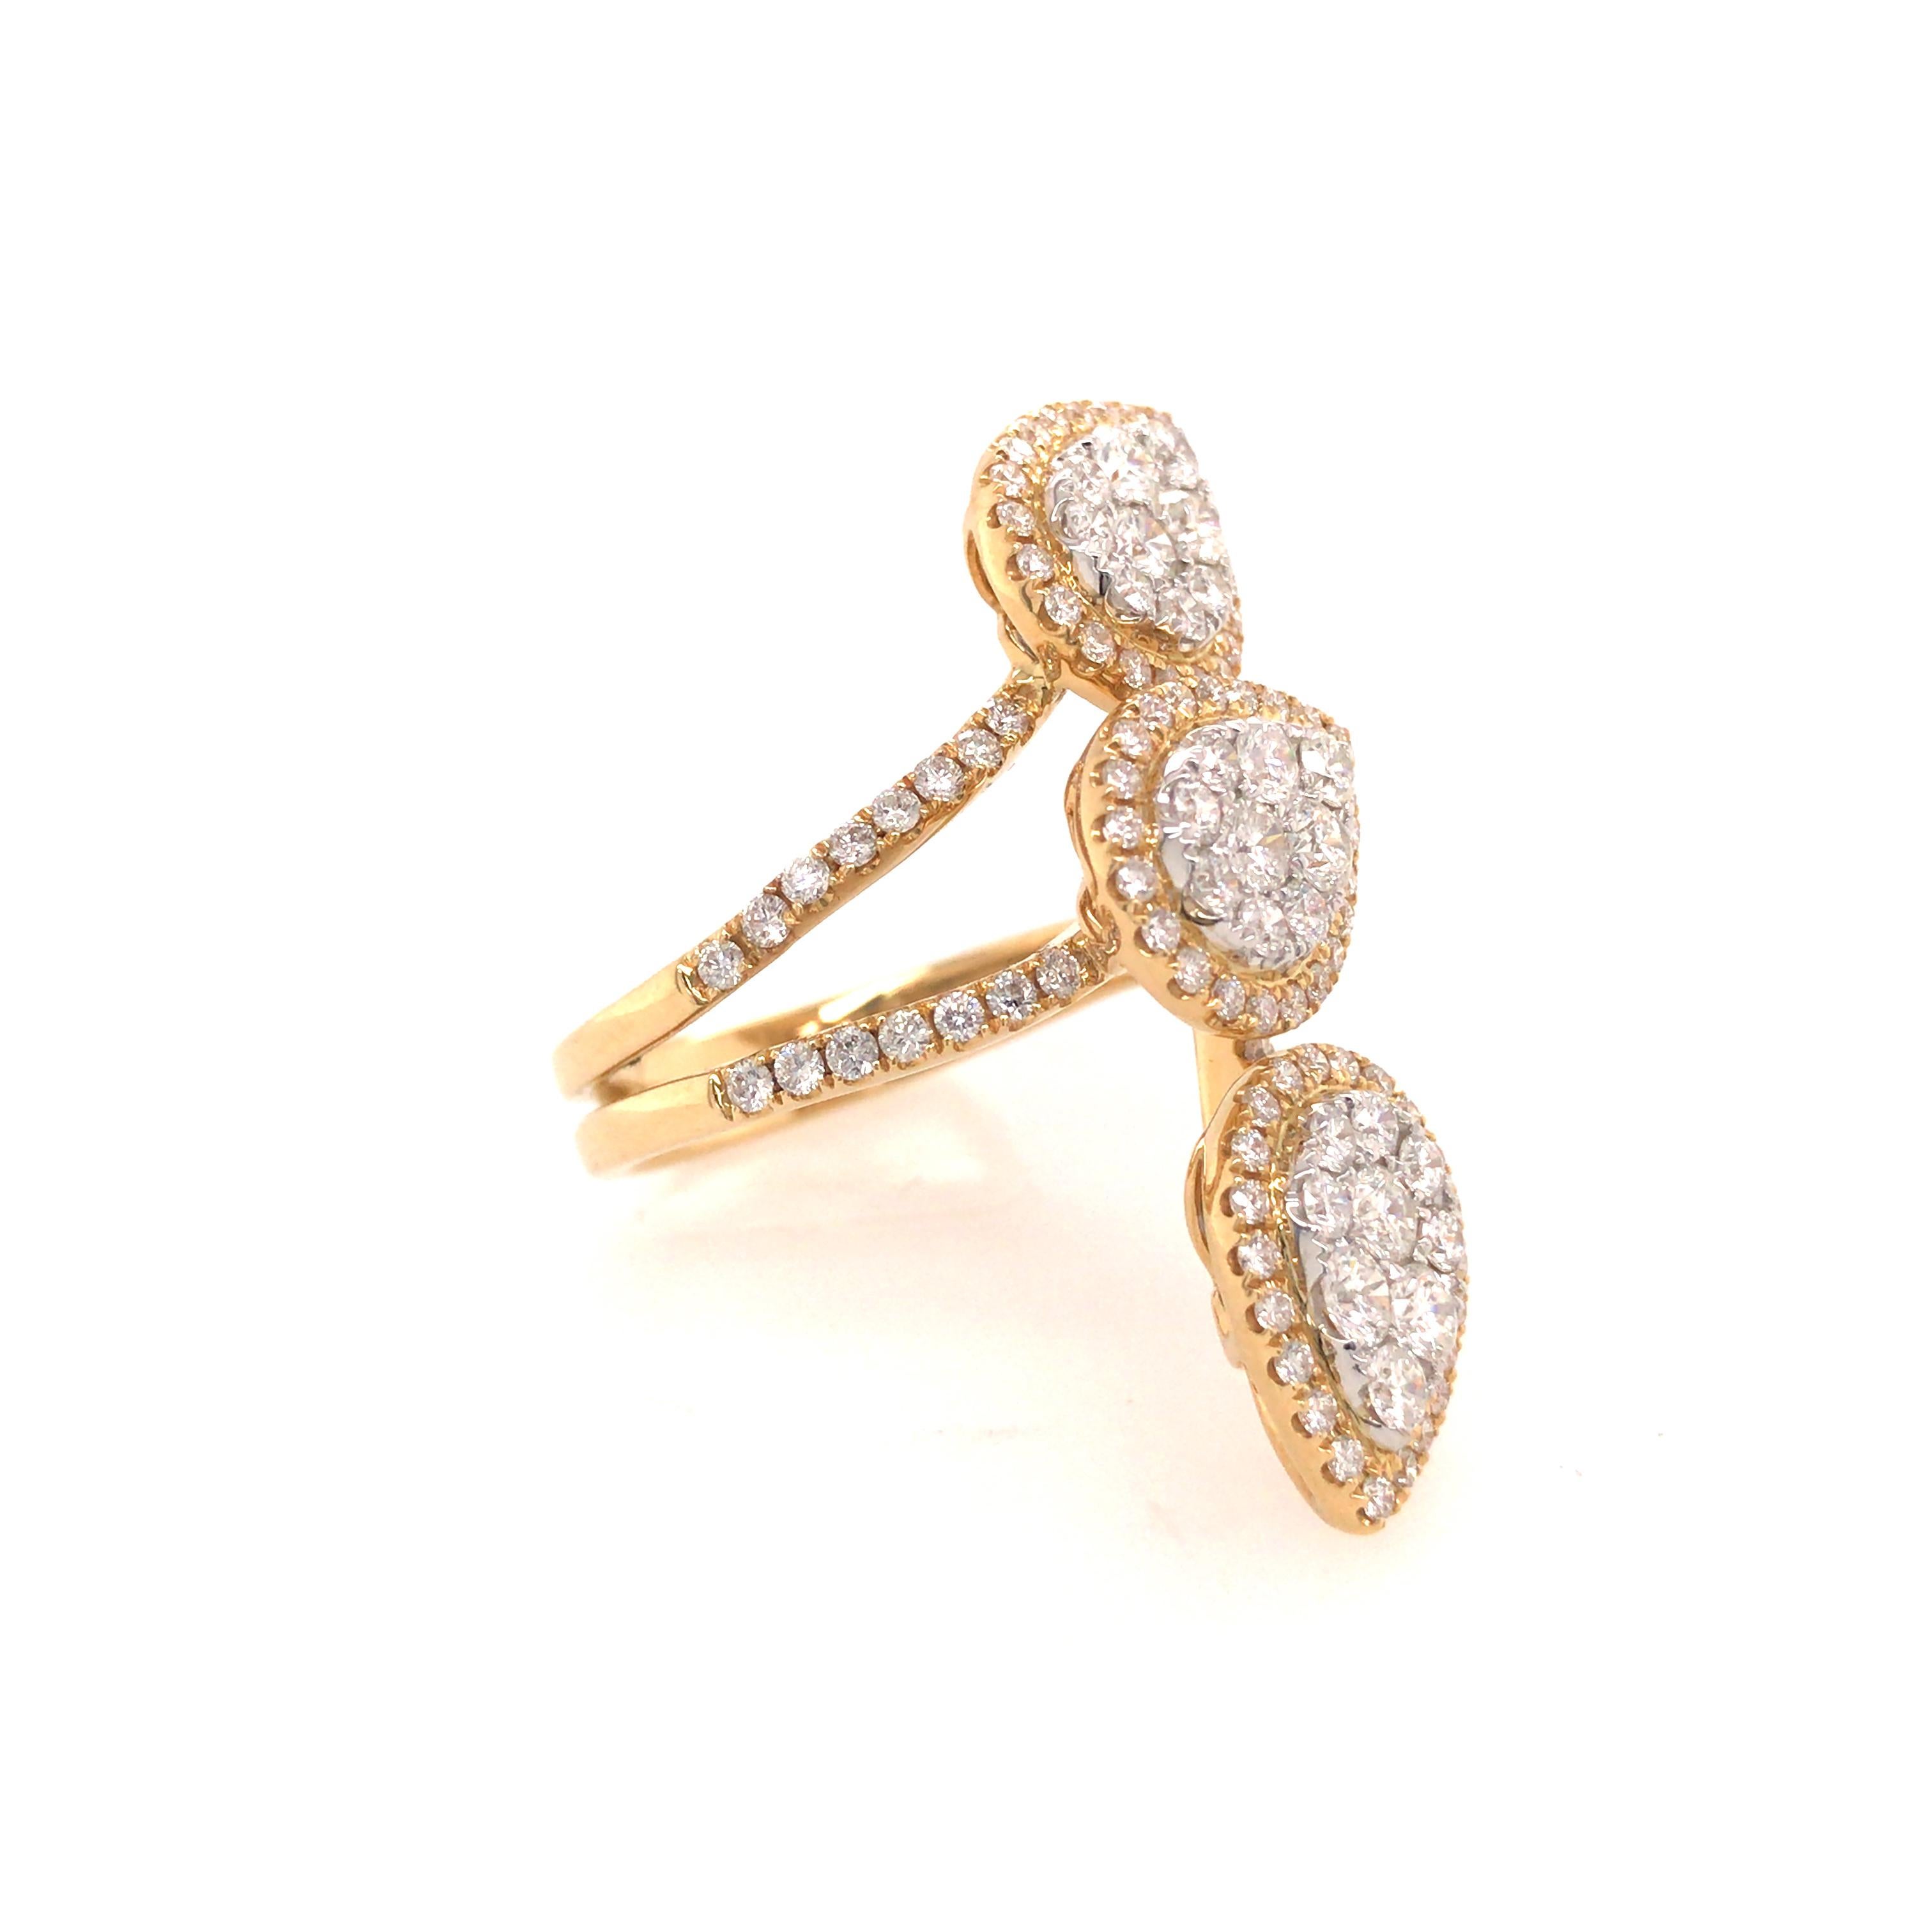 Three Pear Shape Cluster Ring in 18K Two-Tone Gold.  Round Brilliant Cut Diamonds weighing 2.03 carat total weight, G-H in color and VS-SI in clarity are expertly set.  The ring measures 1.5 inch in length and 1/2 inch in width at the widest point. 